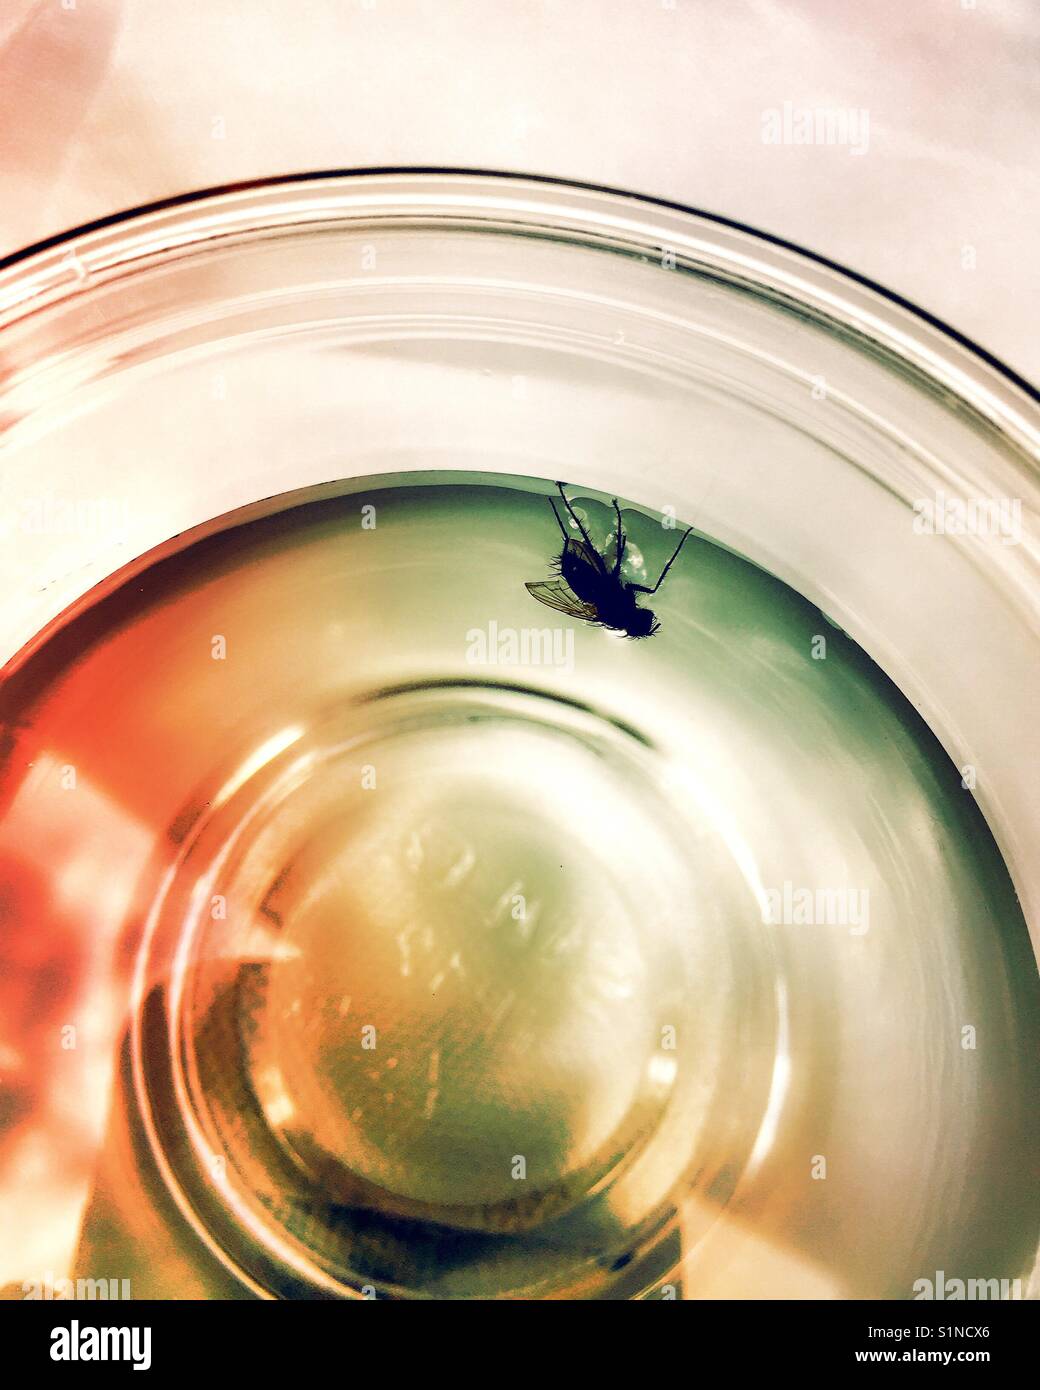 Dead fly that has drowned in a cup of water. Stock Photo